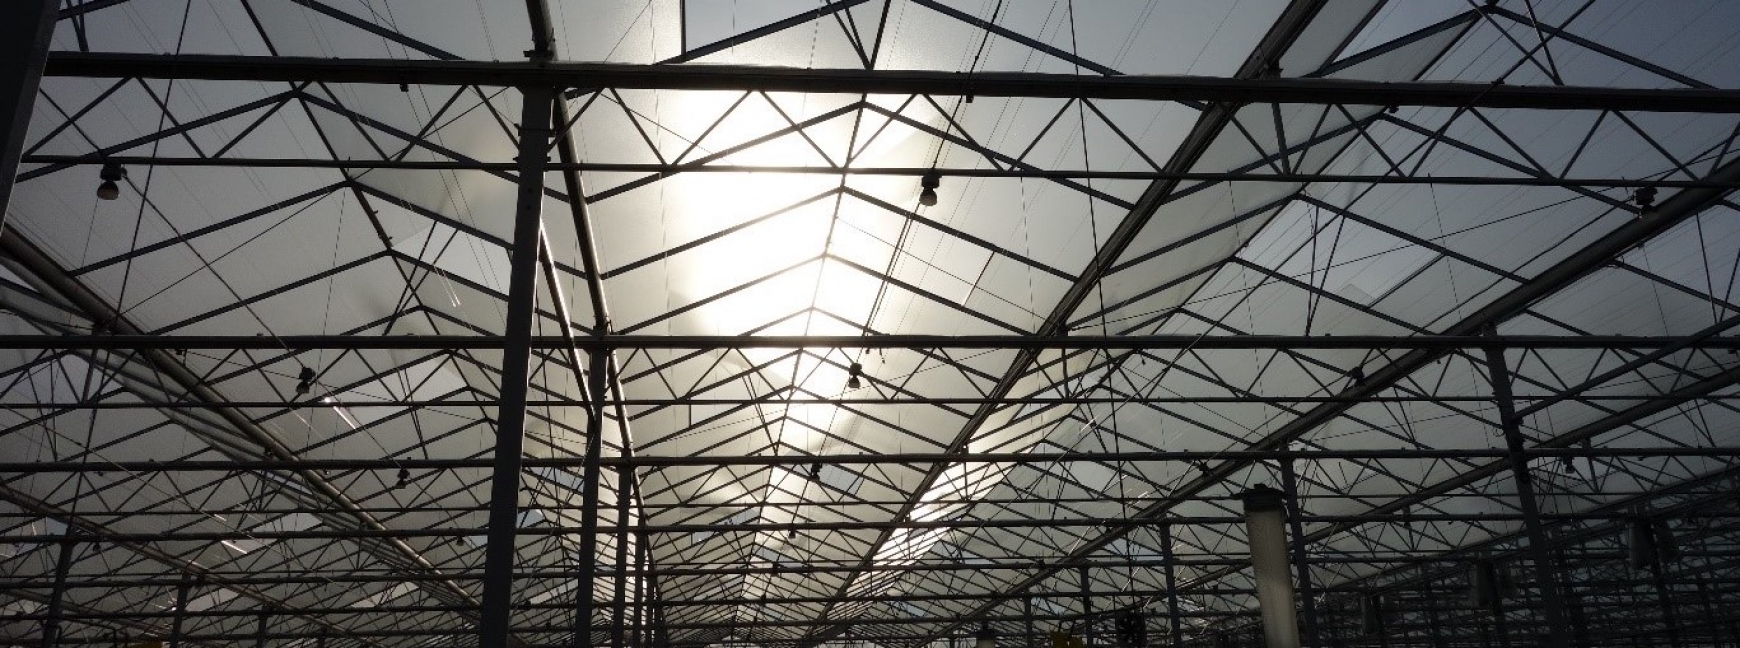 Sunlight through the roof of a glasshouse blog